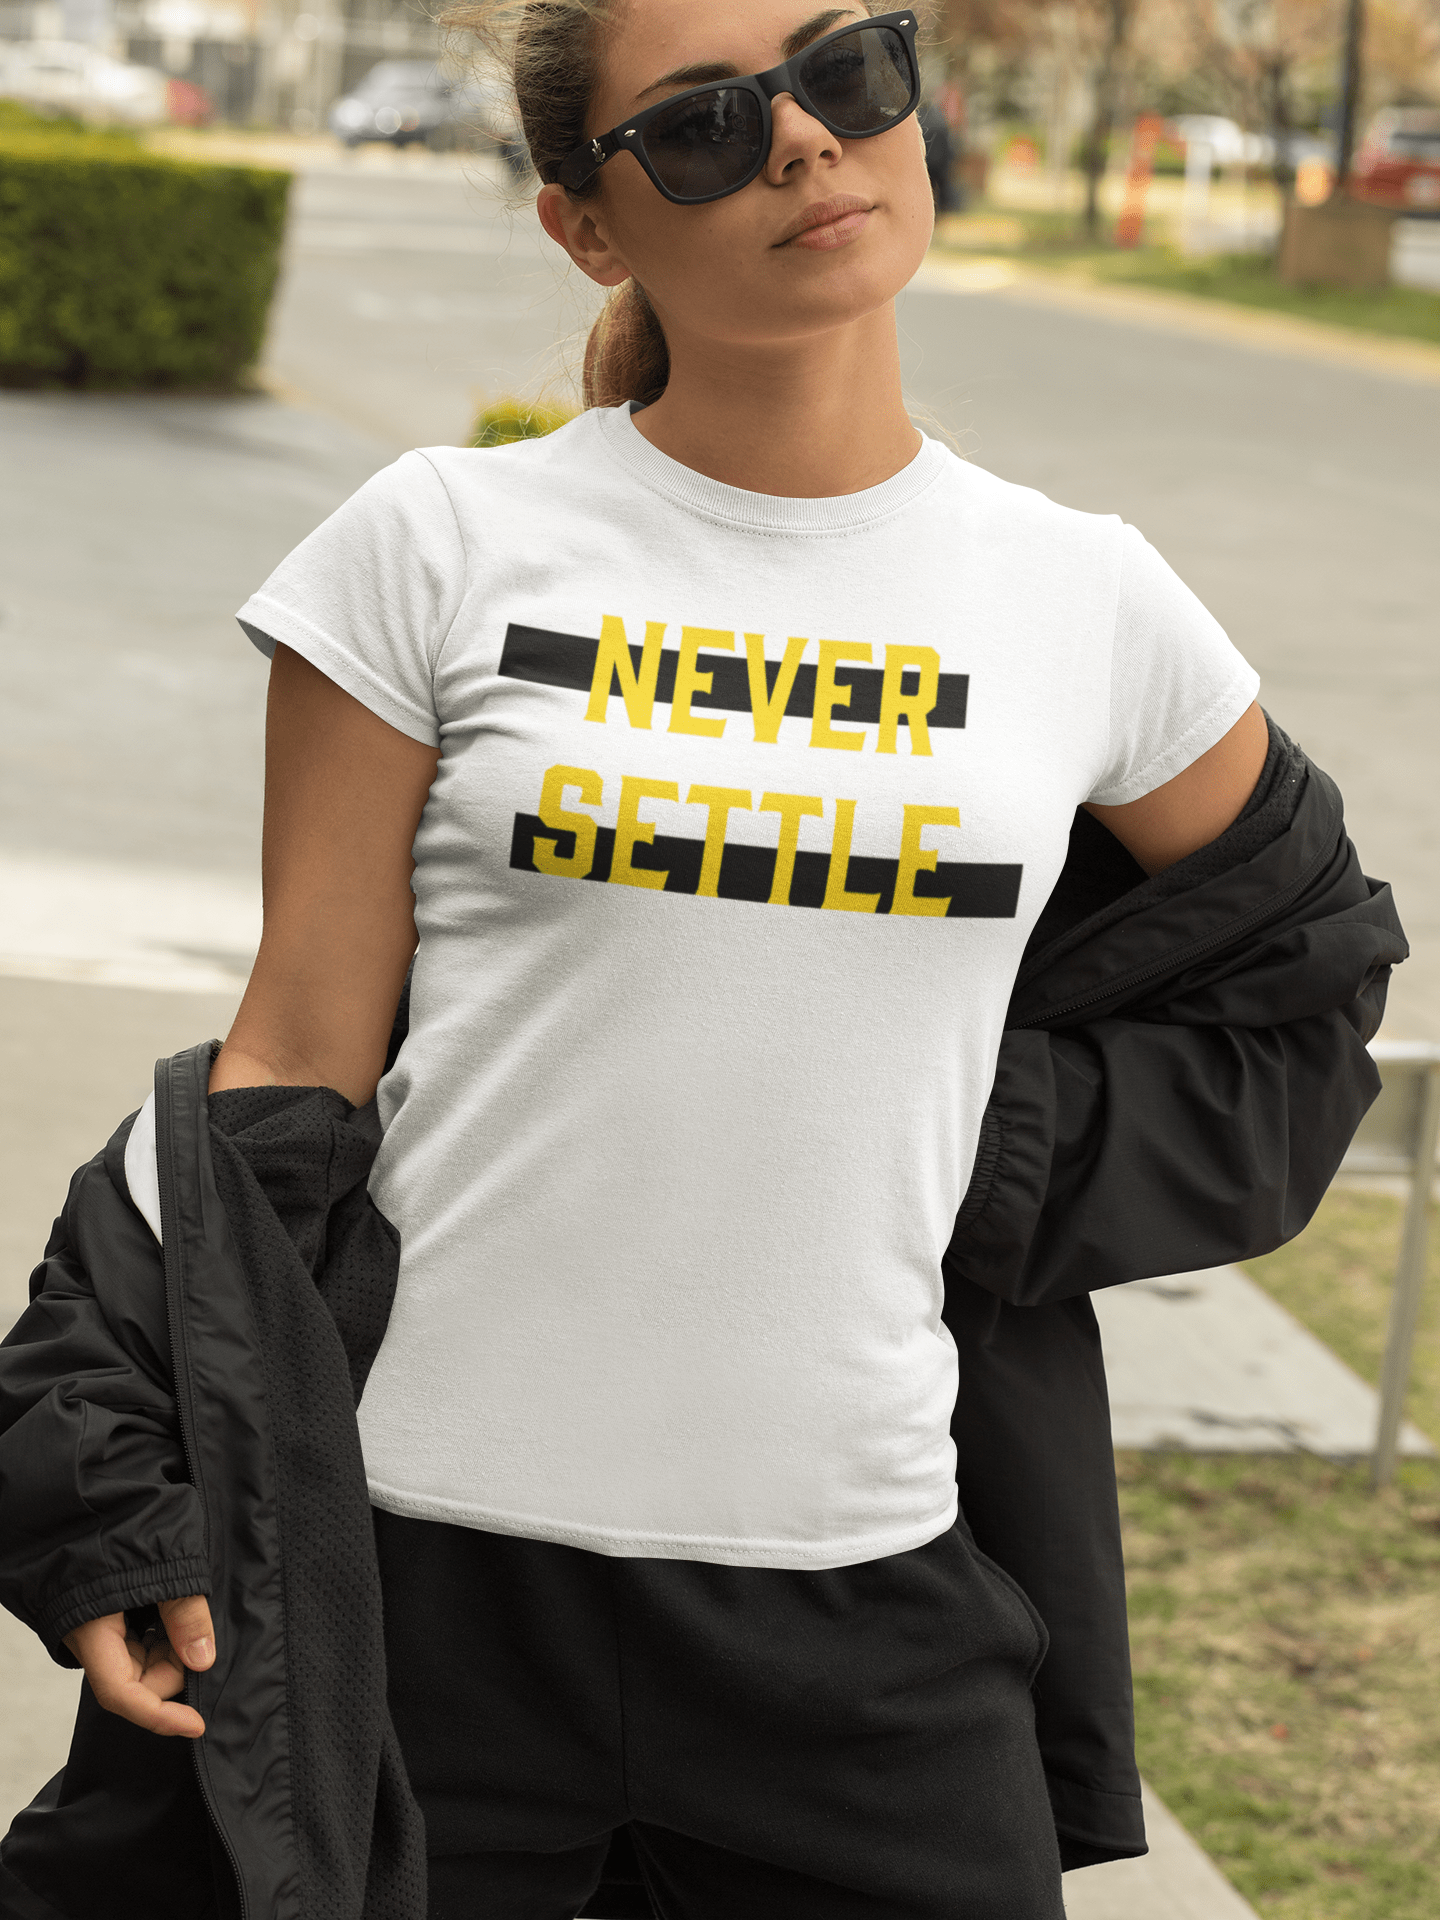 Never Settle Statement Women's Short Sleeve T-shirt Clothing T-shirts A Moment Of Now Women’s Boutique Clothing Online Lifestyle Store